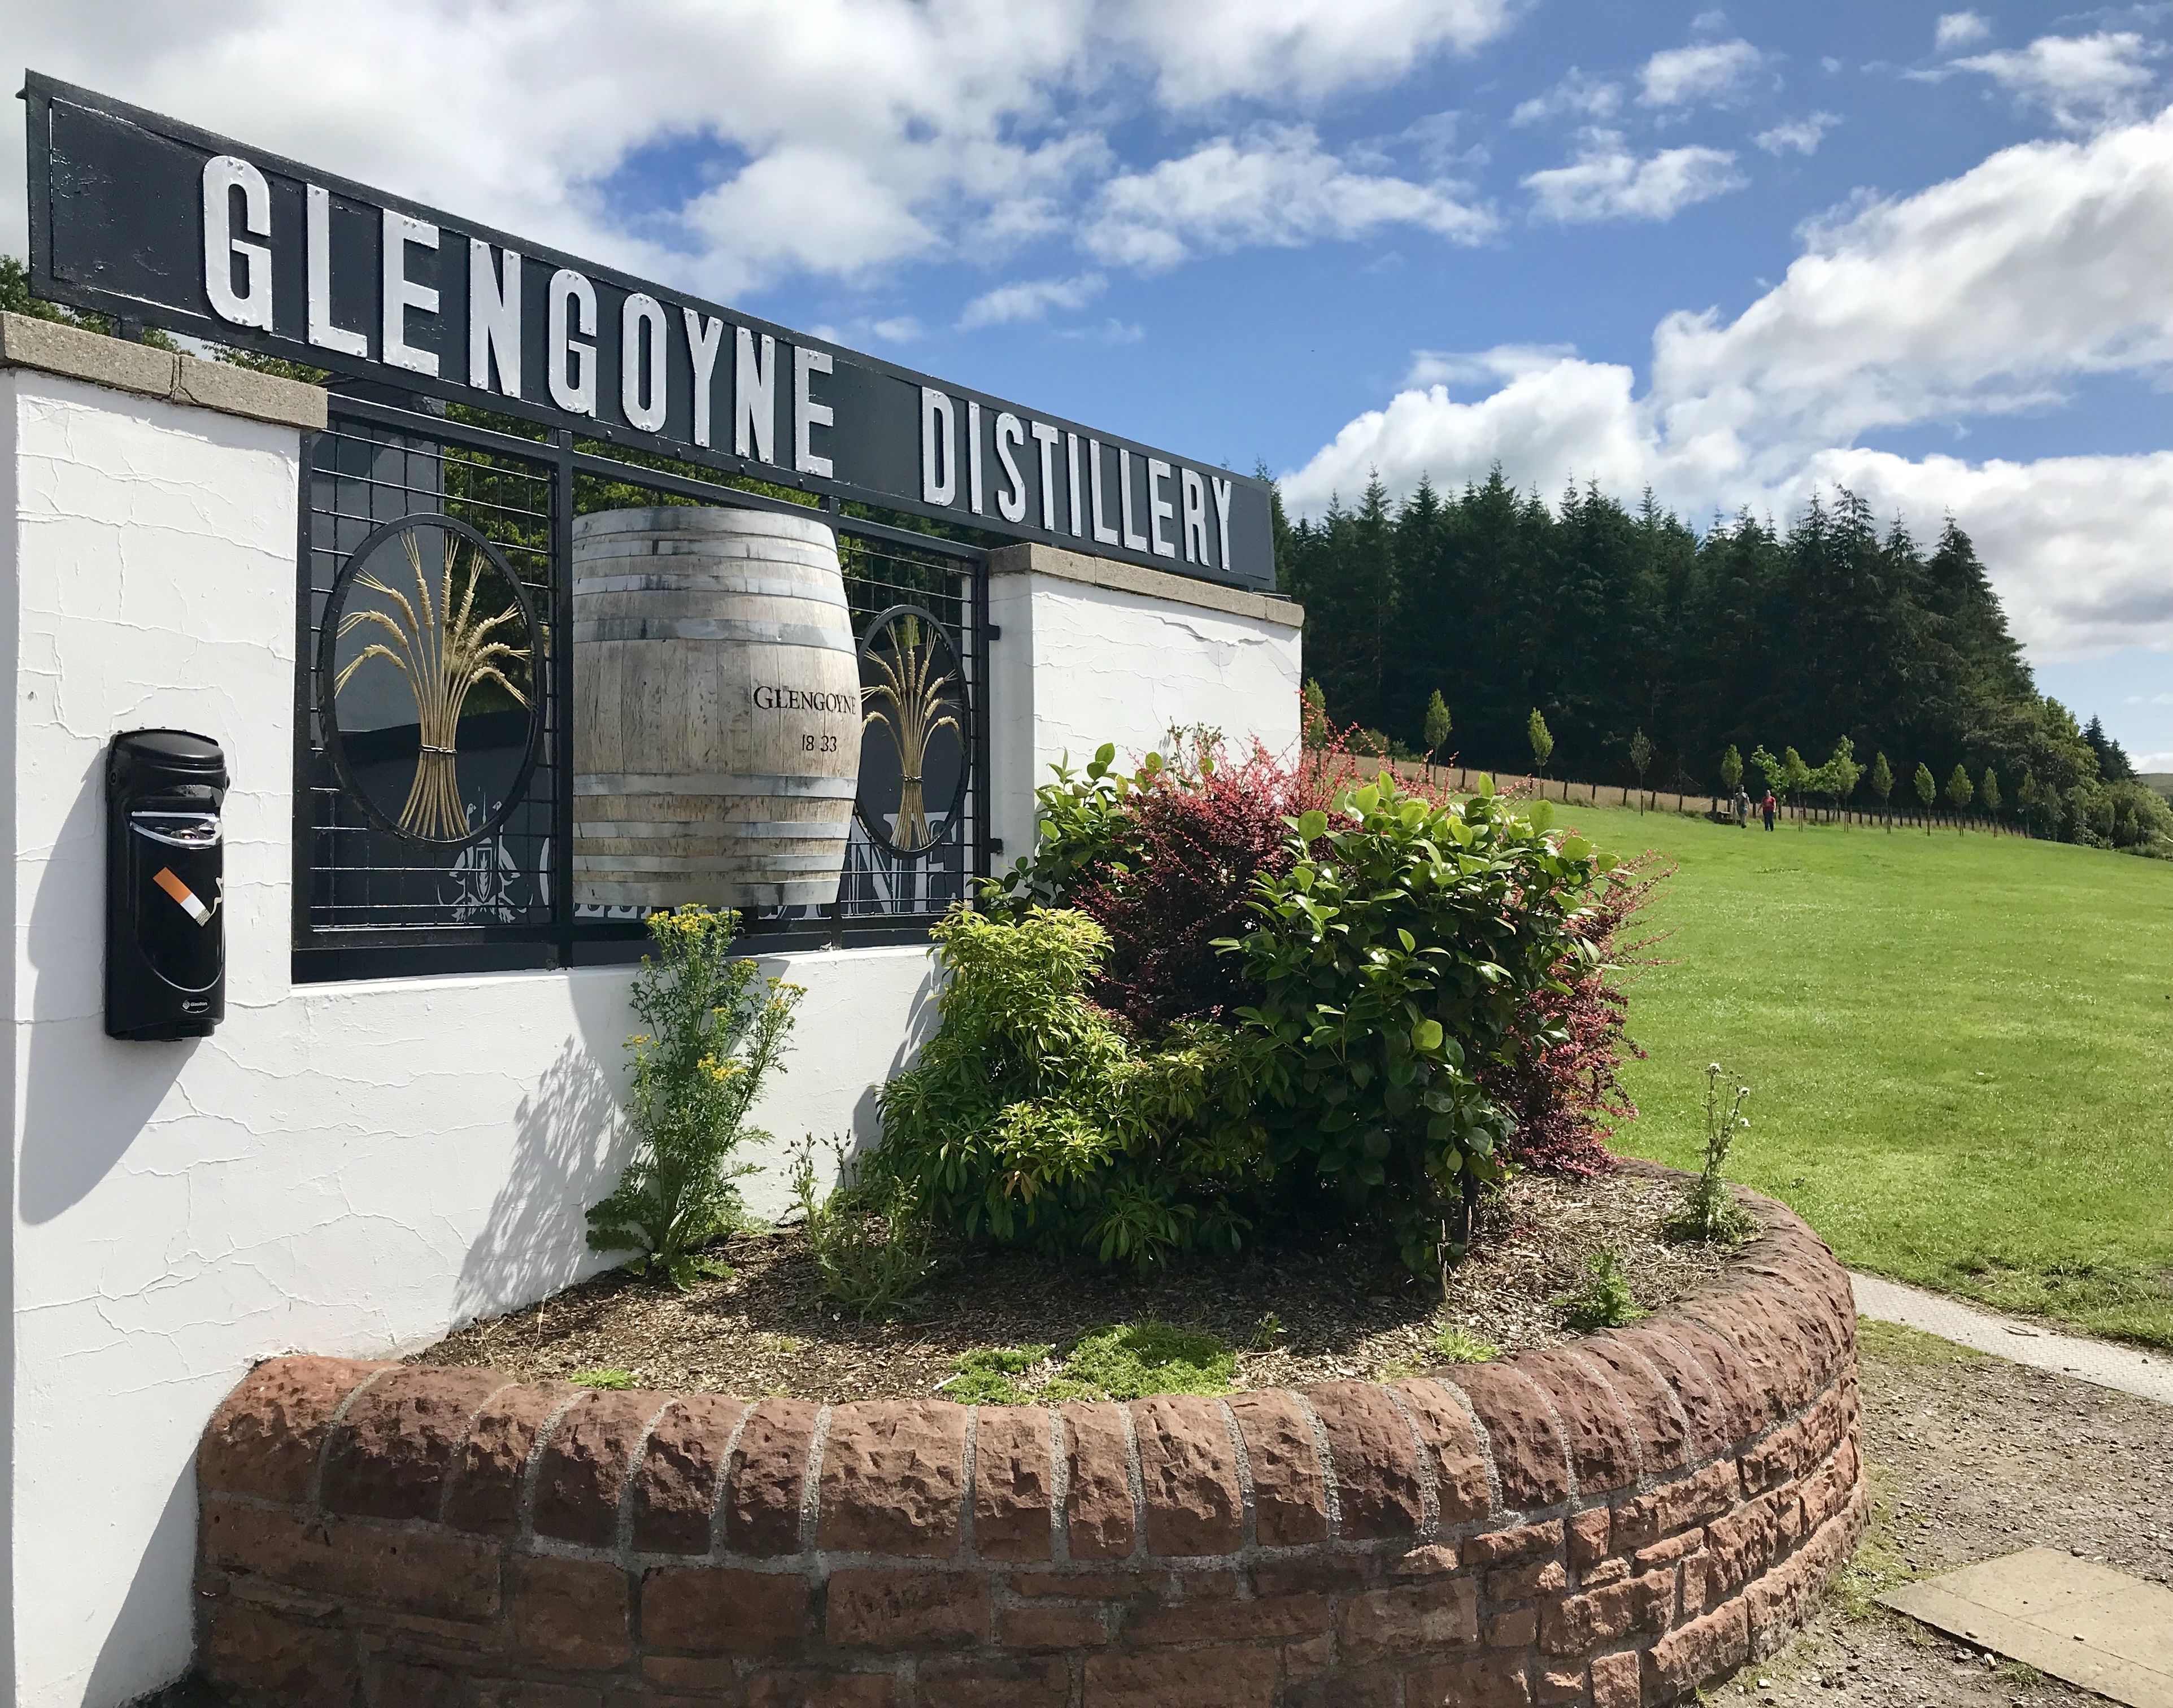 Outside of Glengoyne Distillery on our first day in Scotland.